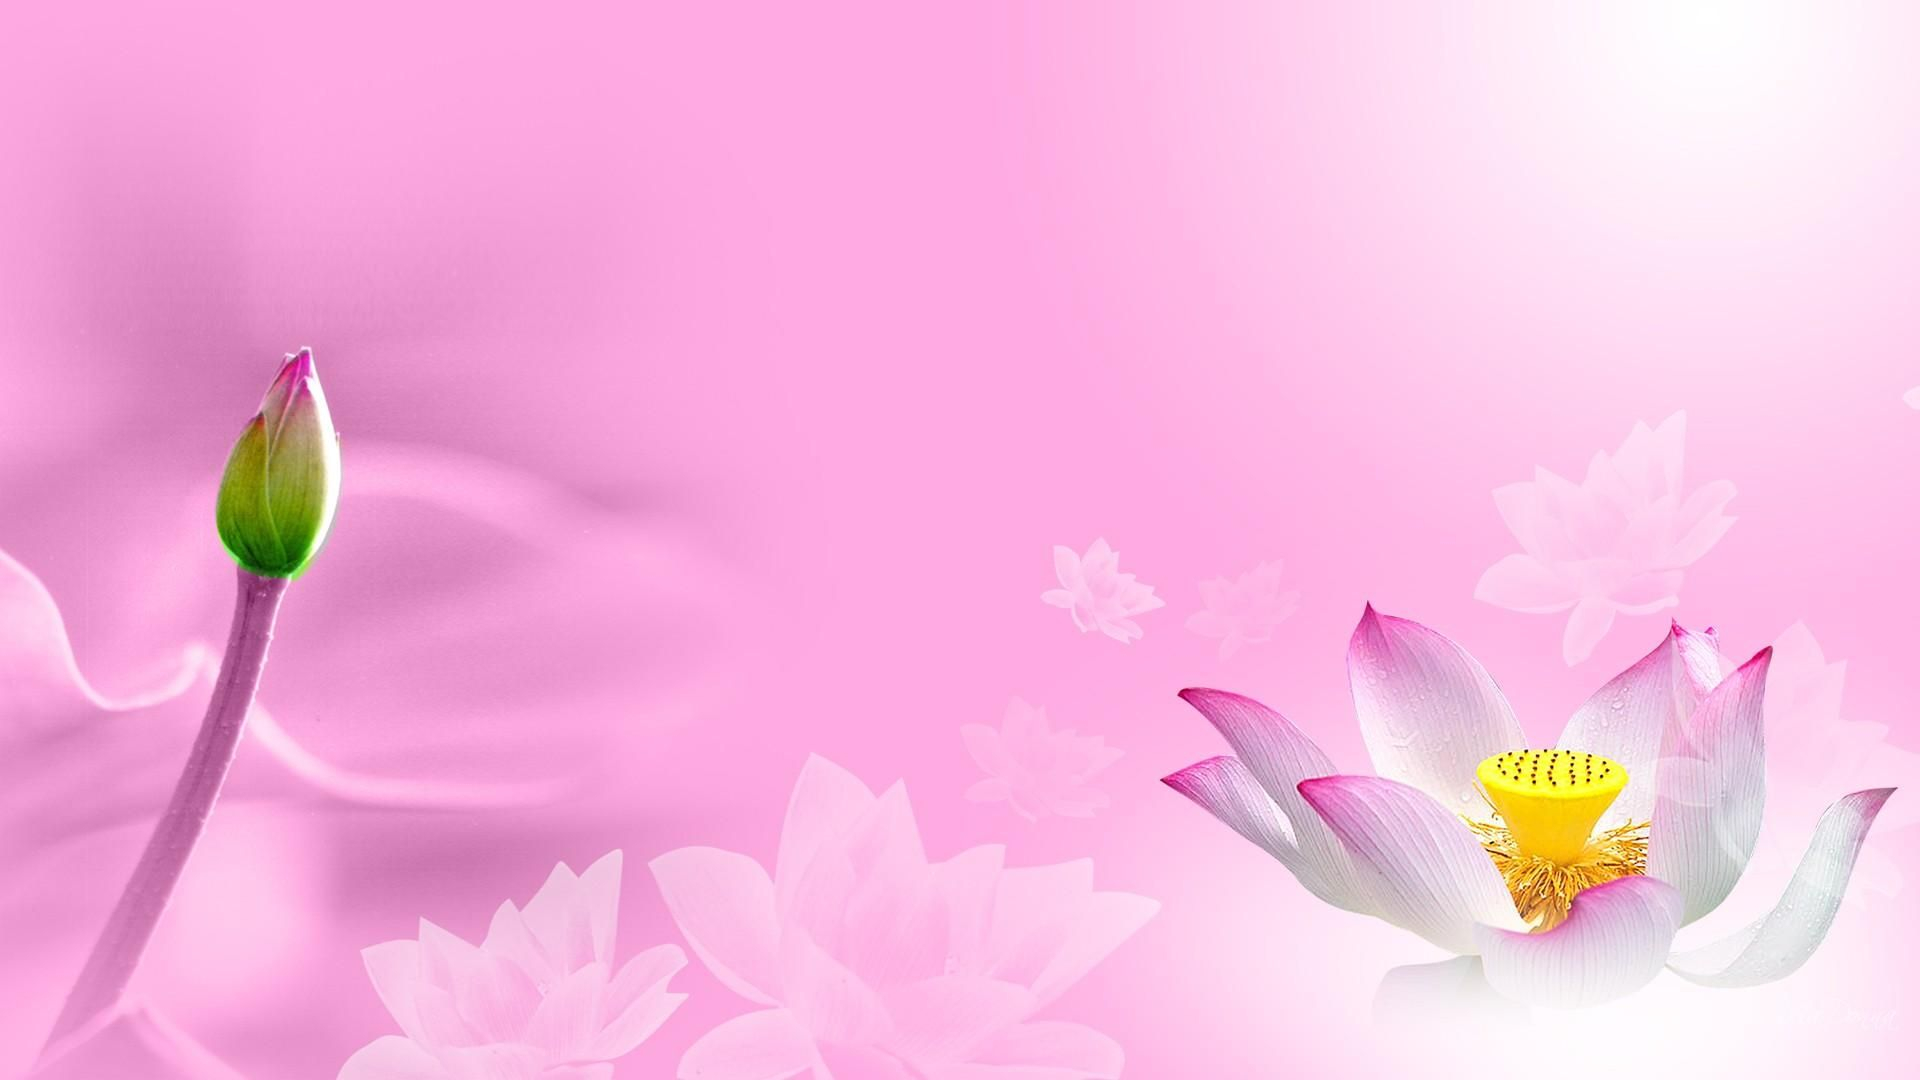 1920x1080 Cute Pink Water Lily Wallpaper | Lily wallpaper, Water lily, Wallpaper website